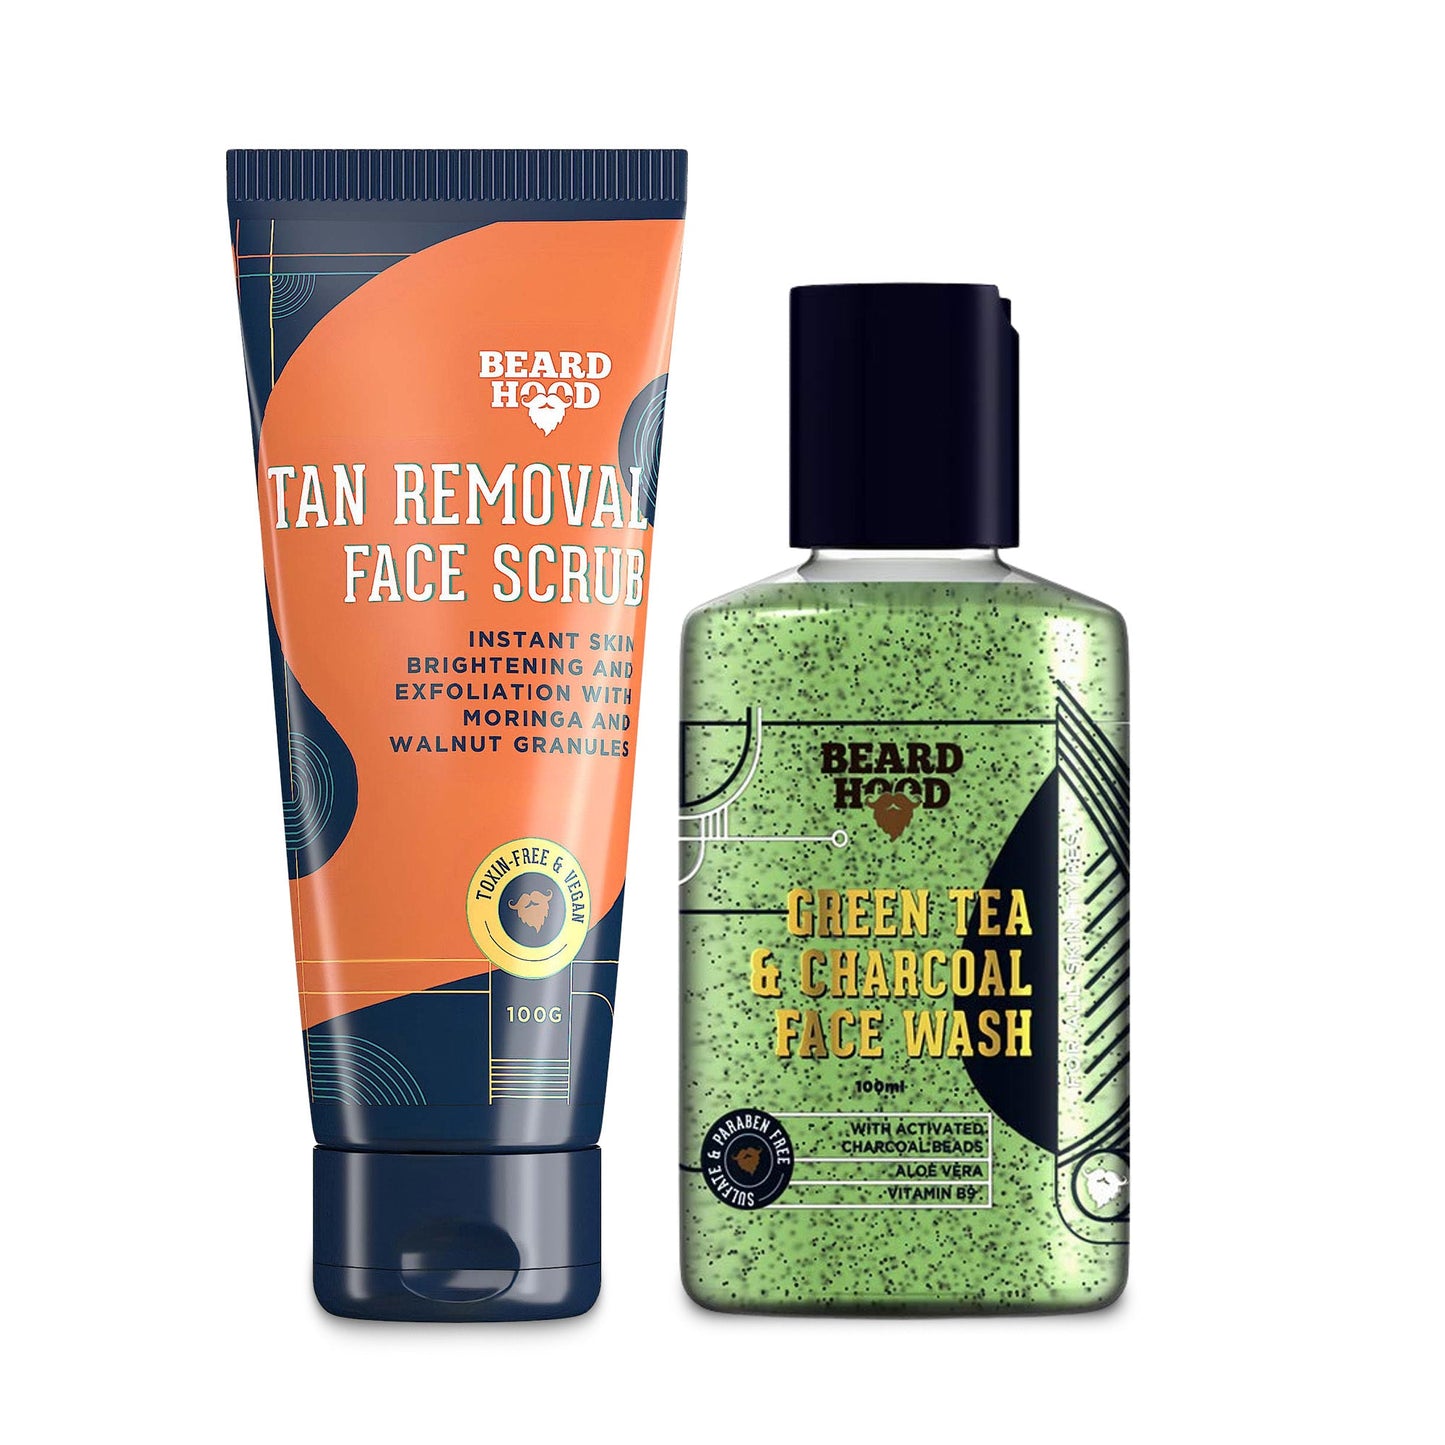 Green Tea + Charcoal Face Wash and Face Scrub Combo - 100g each